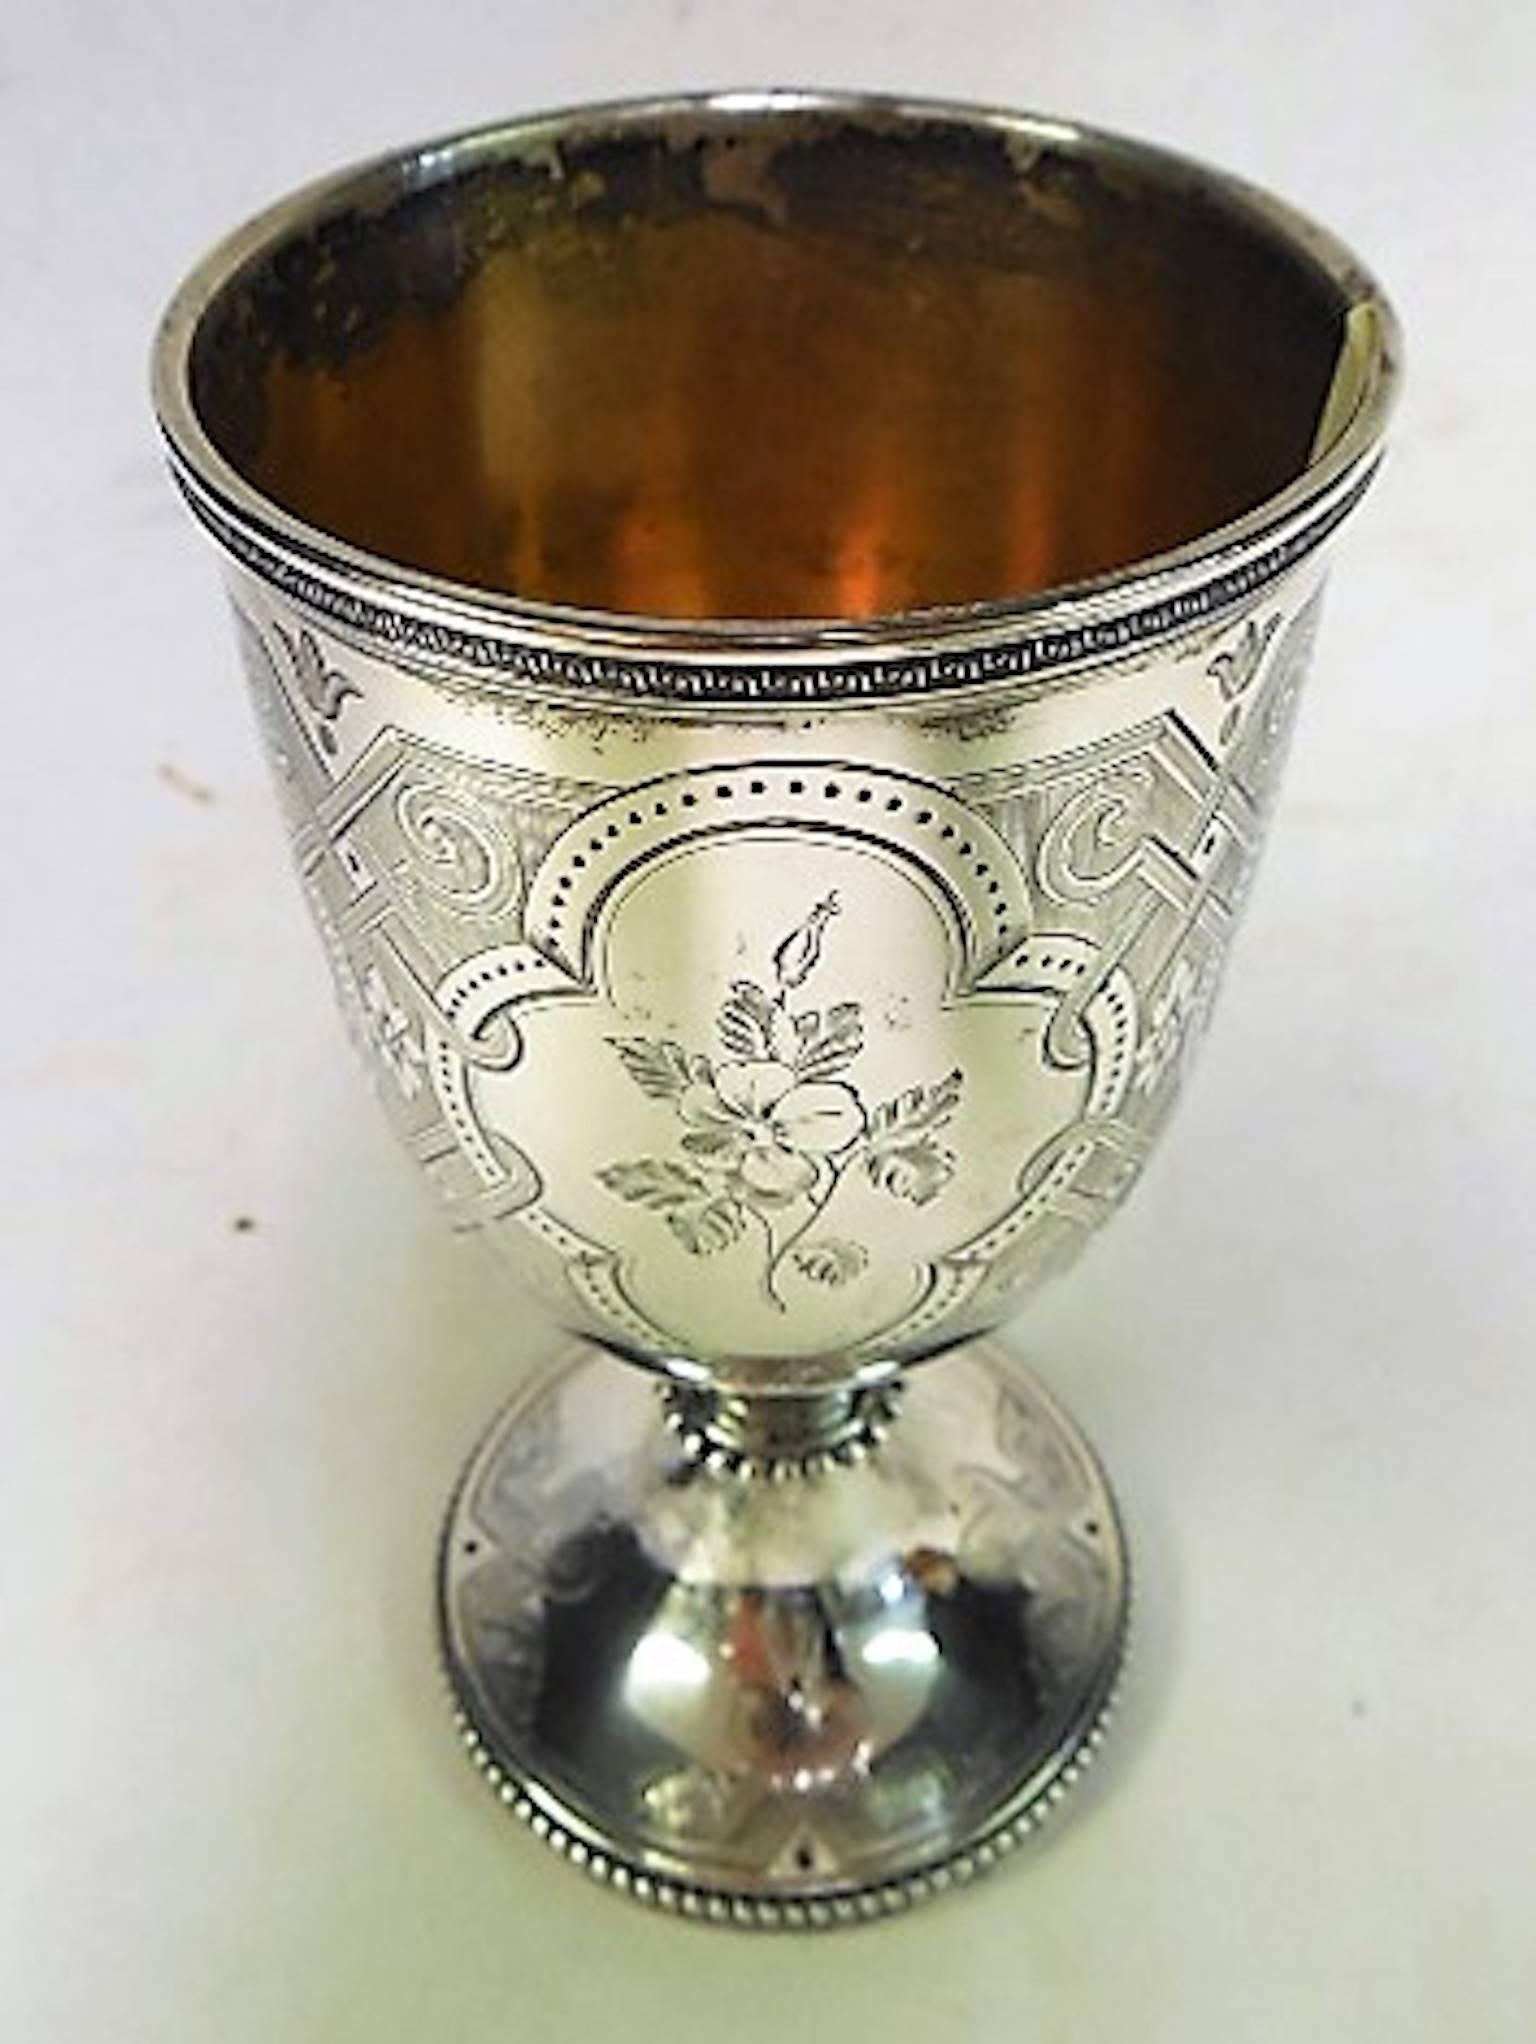 George Angell, London, 1859 sterling goblet approximate 4.37 ot.